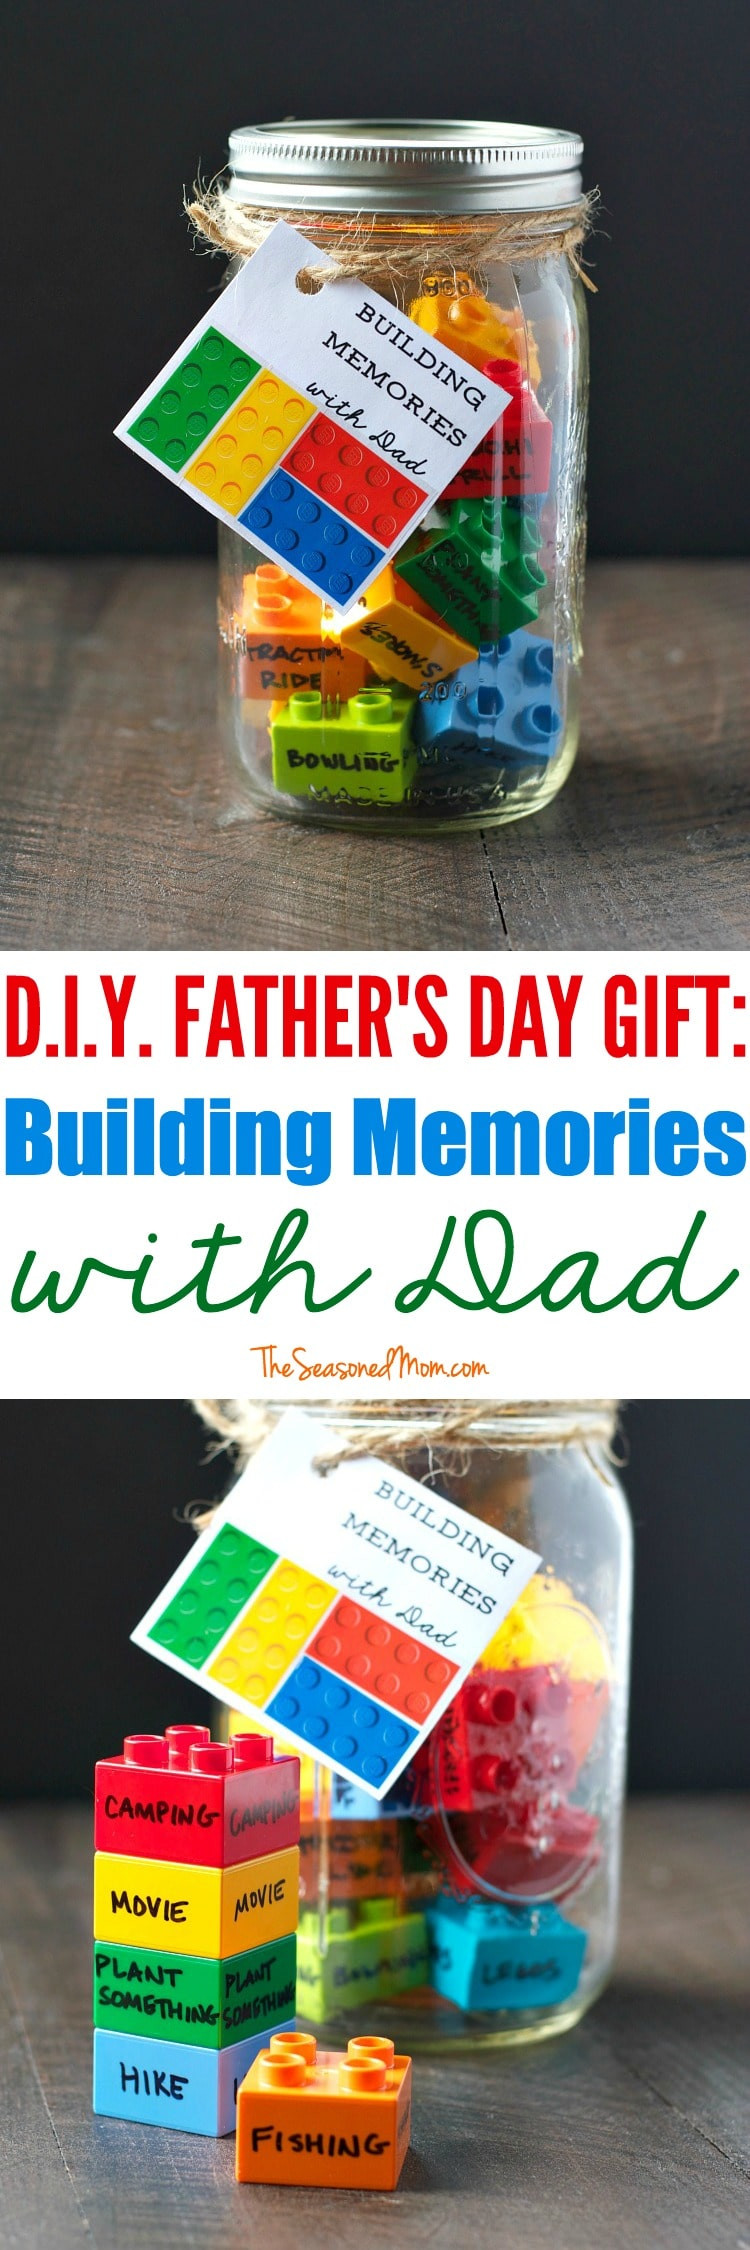 Homemade Fathers Day Gifts Ideas
 25 Homemade Father s Day Gifts from Kids That Dad Can